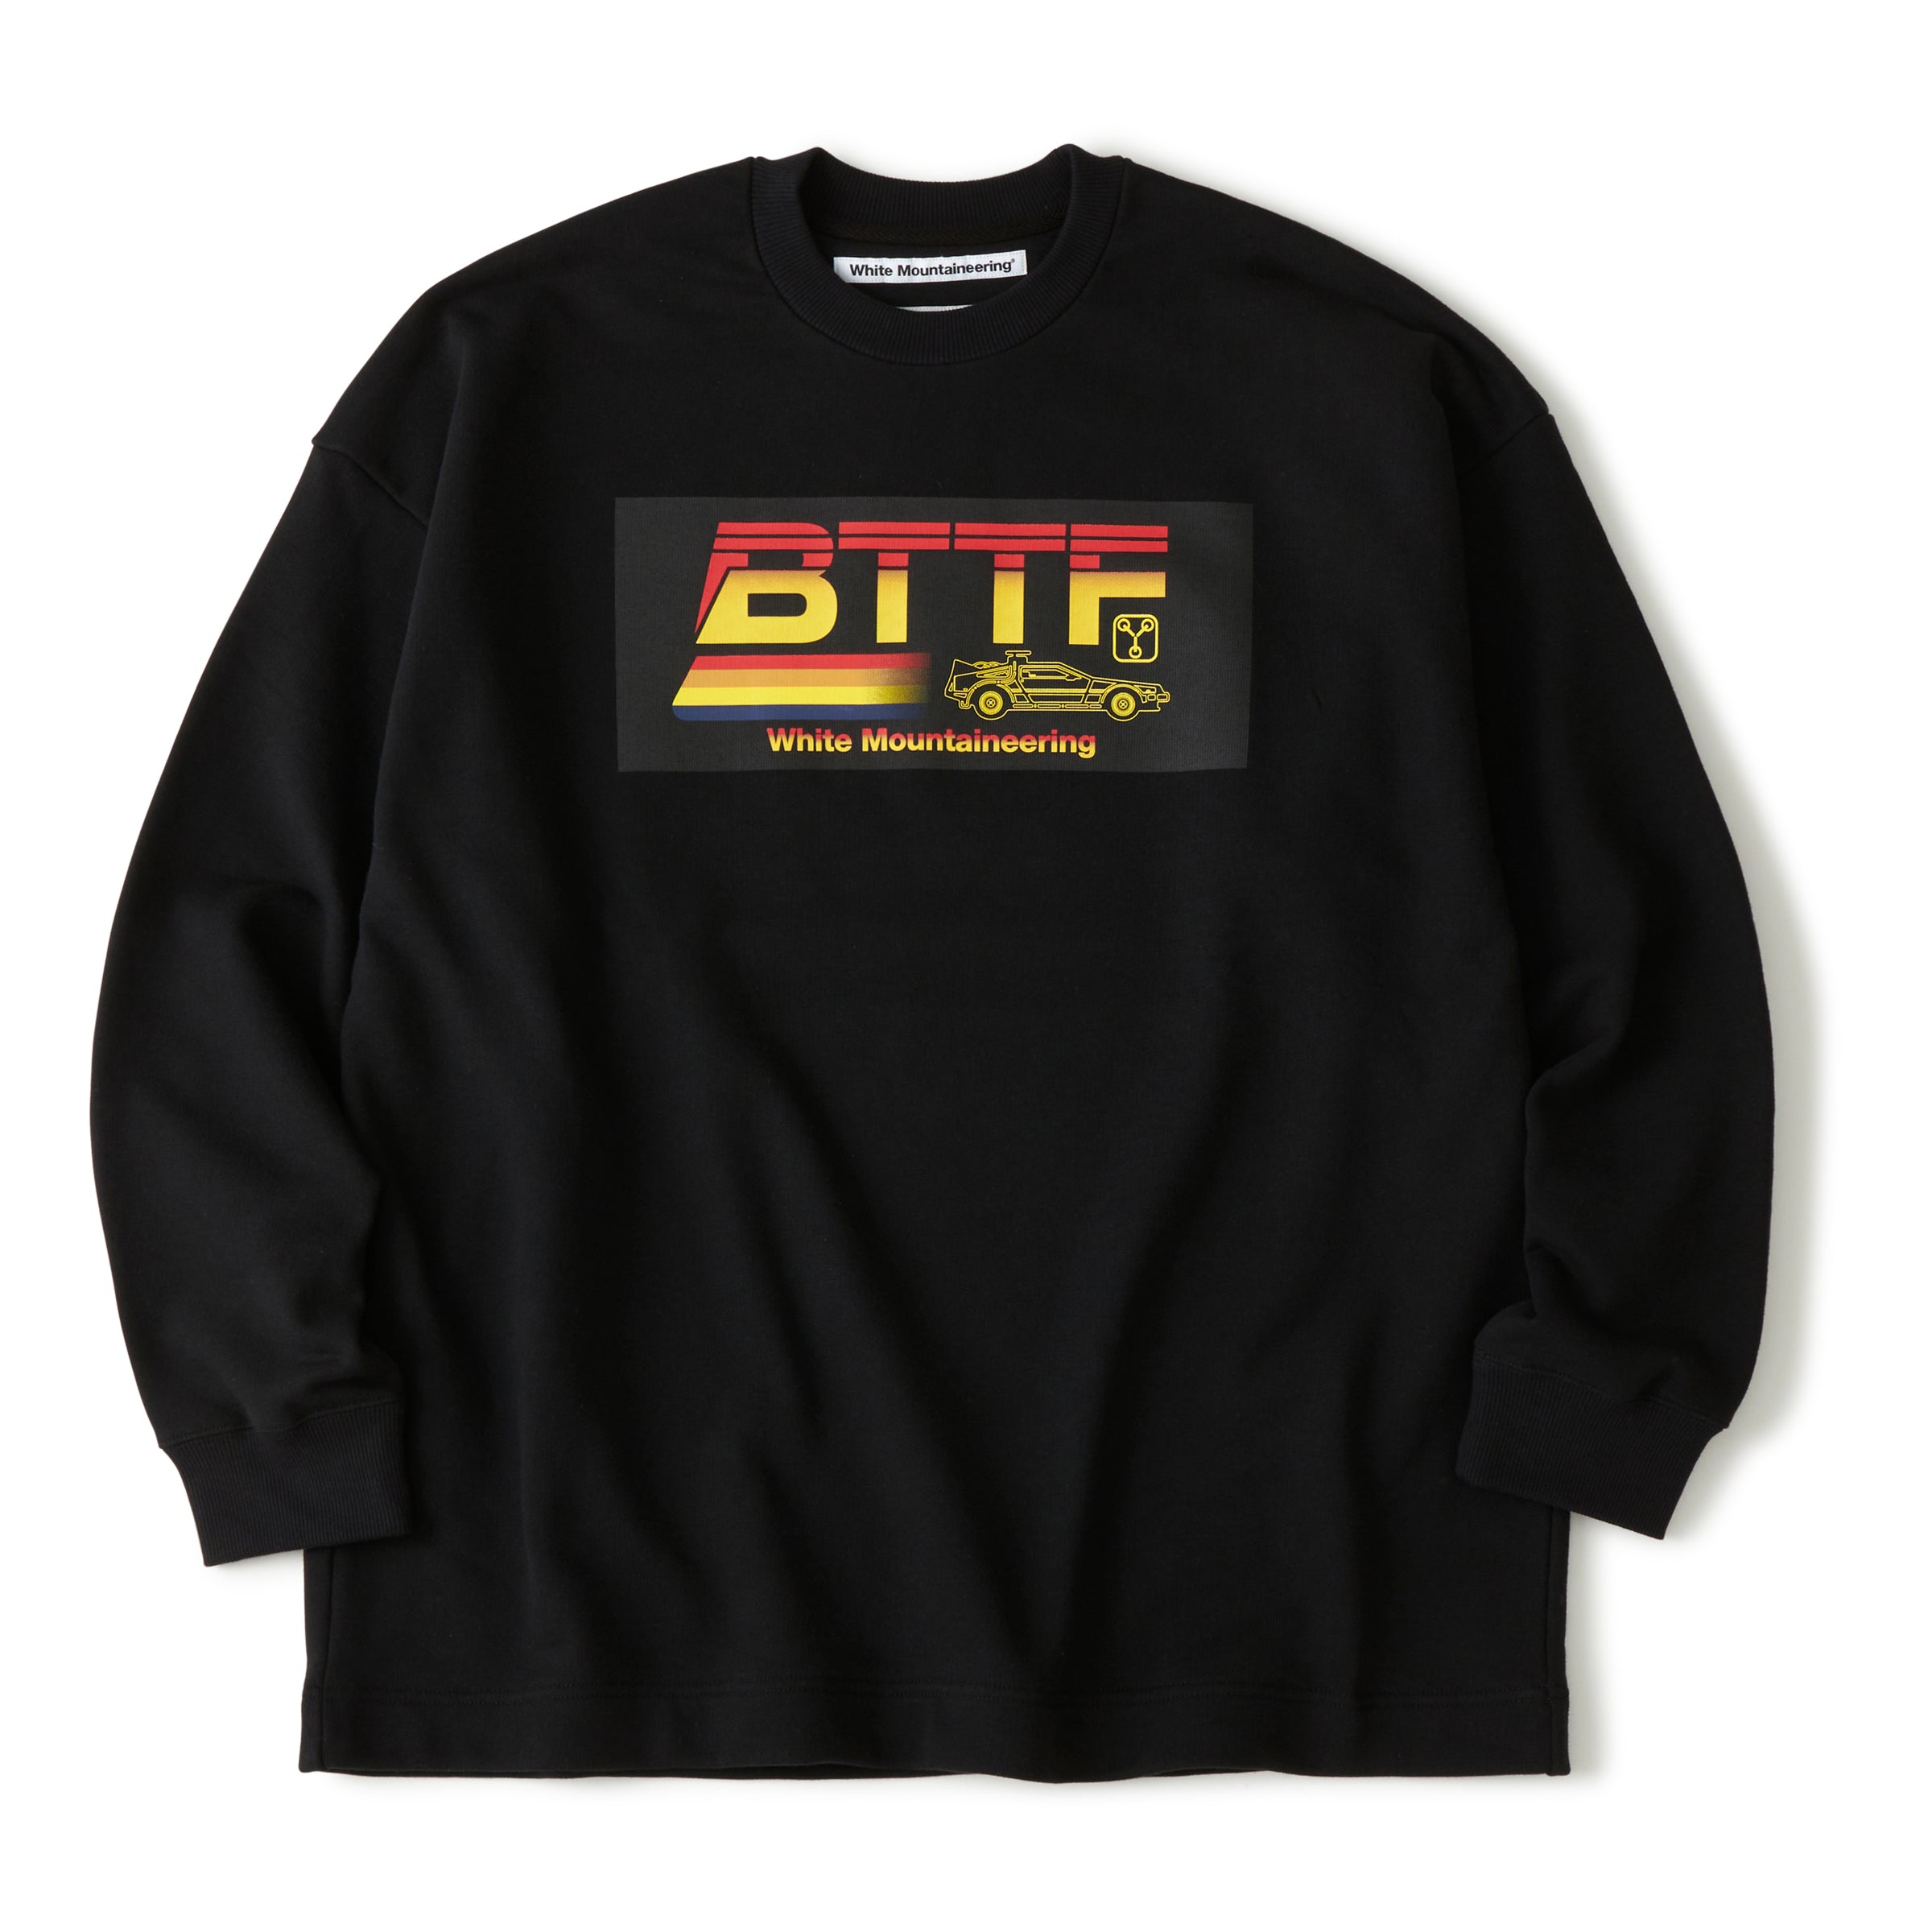 BTTF SWEAT SHIRT – White Mountaineering OFFICIAL WEB SITE.